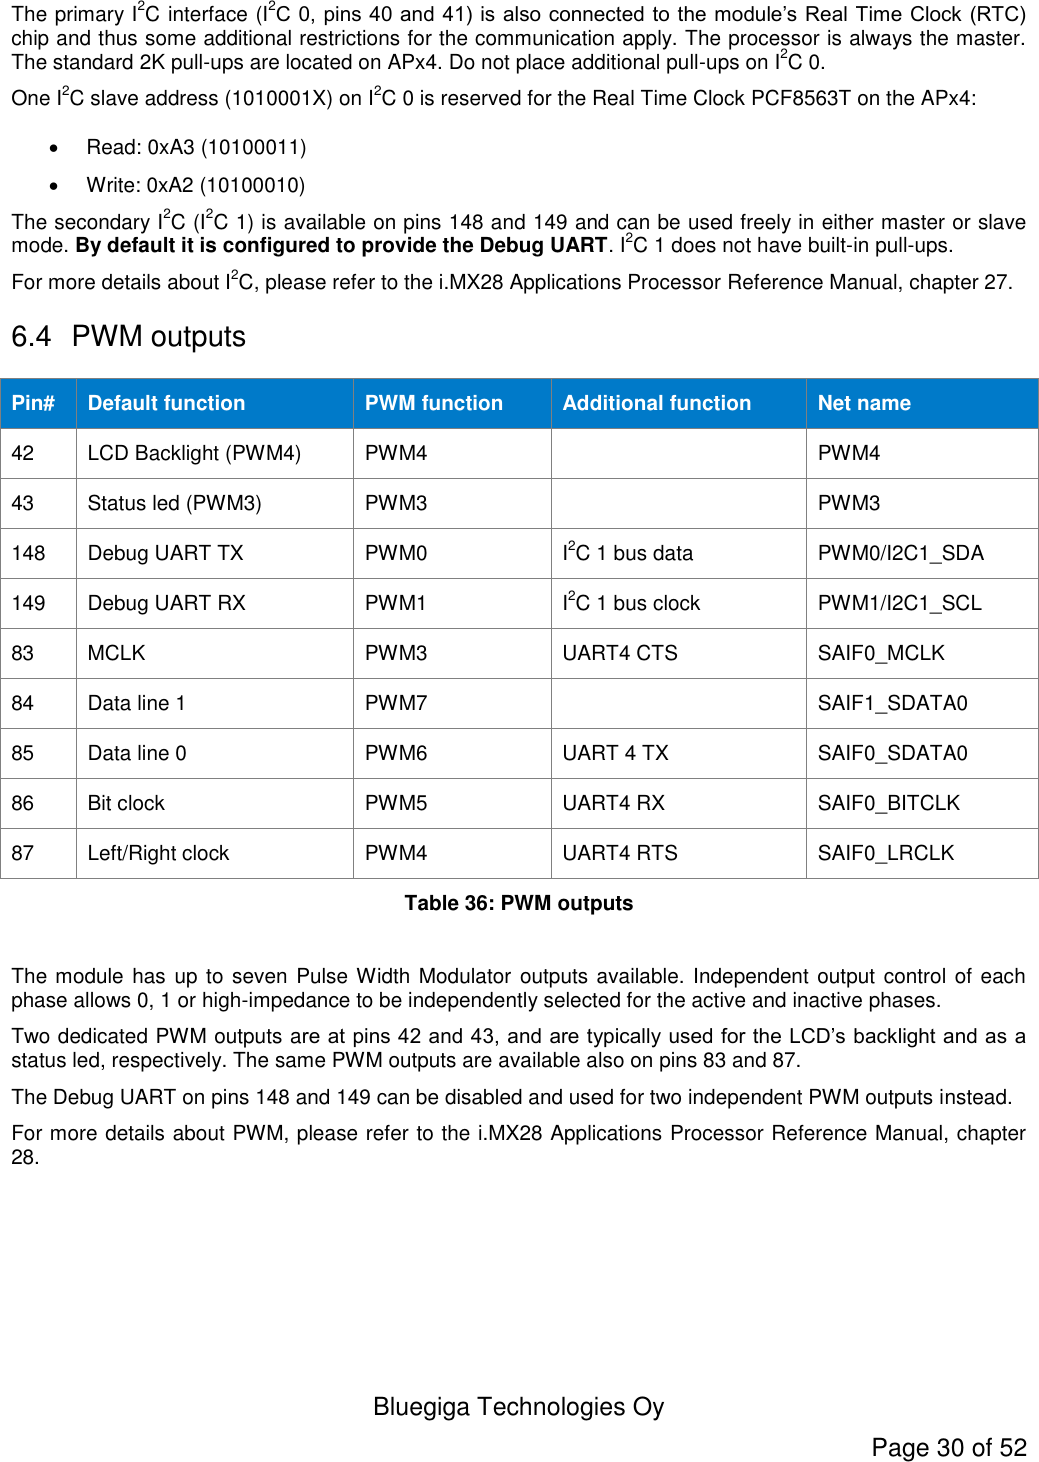  Bluegiga Technologies Oy Page 30 of 52 The primary I2C interface (I2C 0, pins 40 and 41) is also connected to the module’s Real Time Clock (RTC) chip and thus some additional restrictions for the communication apply. The processor is always the master. The standard 2K pull-ups are located on APx4. Do not place additional pull-ups on I2C 0. One I2C slave address (1010001X) on I2C 0 is reserved for the Real Time Clock PCF8563T on the APx4:    Read: 0xA3 (10100011)   Write: 0xA2 (10100010) The secondary I2C (I2C 1) is available on pins 148 and 149 and can be used freely in either master or slave mode. By default it is configured to provide the Debug UART. I2C 1 does not have built-in pull-ups. For more details about I2C, please refer to the i.MX28 Applications Processor Reference Manual, chapter 27. 6.4  PWM outputs Pin# Default function PWM function Additional function Net name 42 LCD Backlight (PWM4) PWM4  PWM4 43 Status led (PWM3) PWM3  PWM3 148 Debug UART TX PWM0 I2C 1 bus data  PWM0/I2C1_SDA 149 Debug UART RX  PWM1 I2C 1 bus clock PWM1/I2C1_SCL 83 MCLK PWM3 UART4 CTS SAIF0_MCLK 84 Data line 1 PWM7  SAIF1_SDATA0 85 Data line 0 PWM6 UART 4 TX SAIF0_SDATA0 86 Bit clock PWM5 UART4 RX  SAIF0_BITCLK 87 Left/Right clock PWM4 UART4 RTS SAIF0_LRCLK Table 36: PWM outputs  The module has up to seven  Pulse Width Modulator  outputs available. Independent output control of each phase allows 0, 1 or high-impedance to be independently selected for the active and inactive phases.  Two dedicated PWM outputs are at pins 42 and 43, and are typically used for the LCD’s backlight and as a status led, respectively. The same PWM outputs are available also on pins 83 and 87. The Debug UART on pins 148 and 149 can be disabled and used for two independent PWM outputs instead. For more details about PWM, please refer to the i.MX28 Applications Processor Reference Manual, chapter 28.  